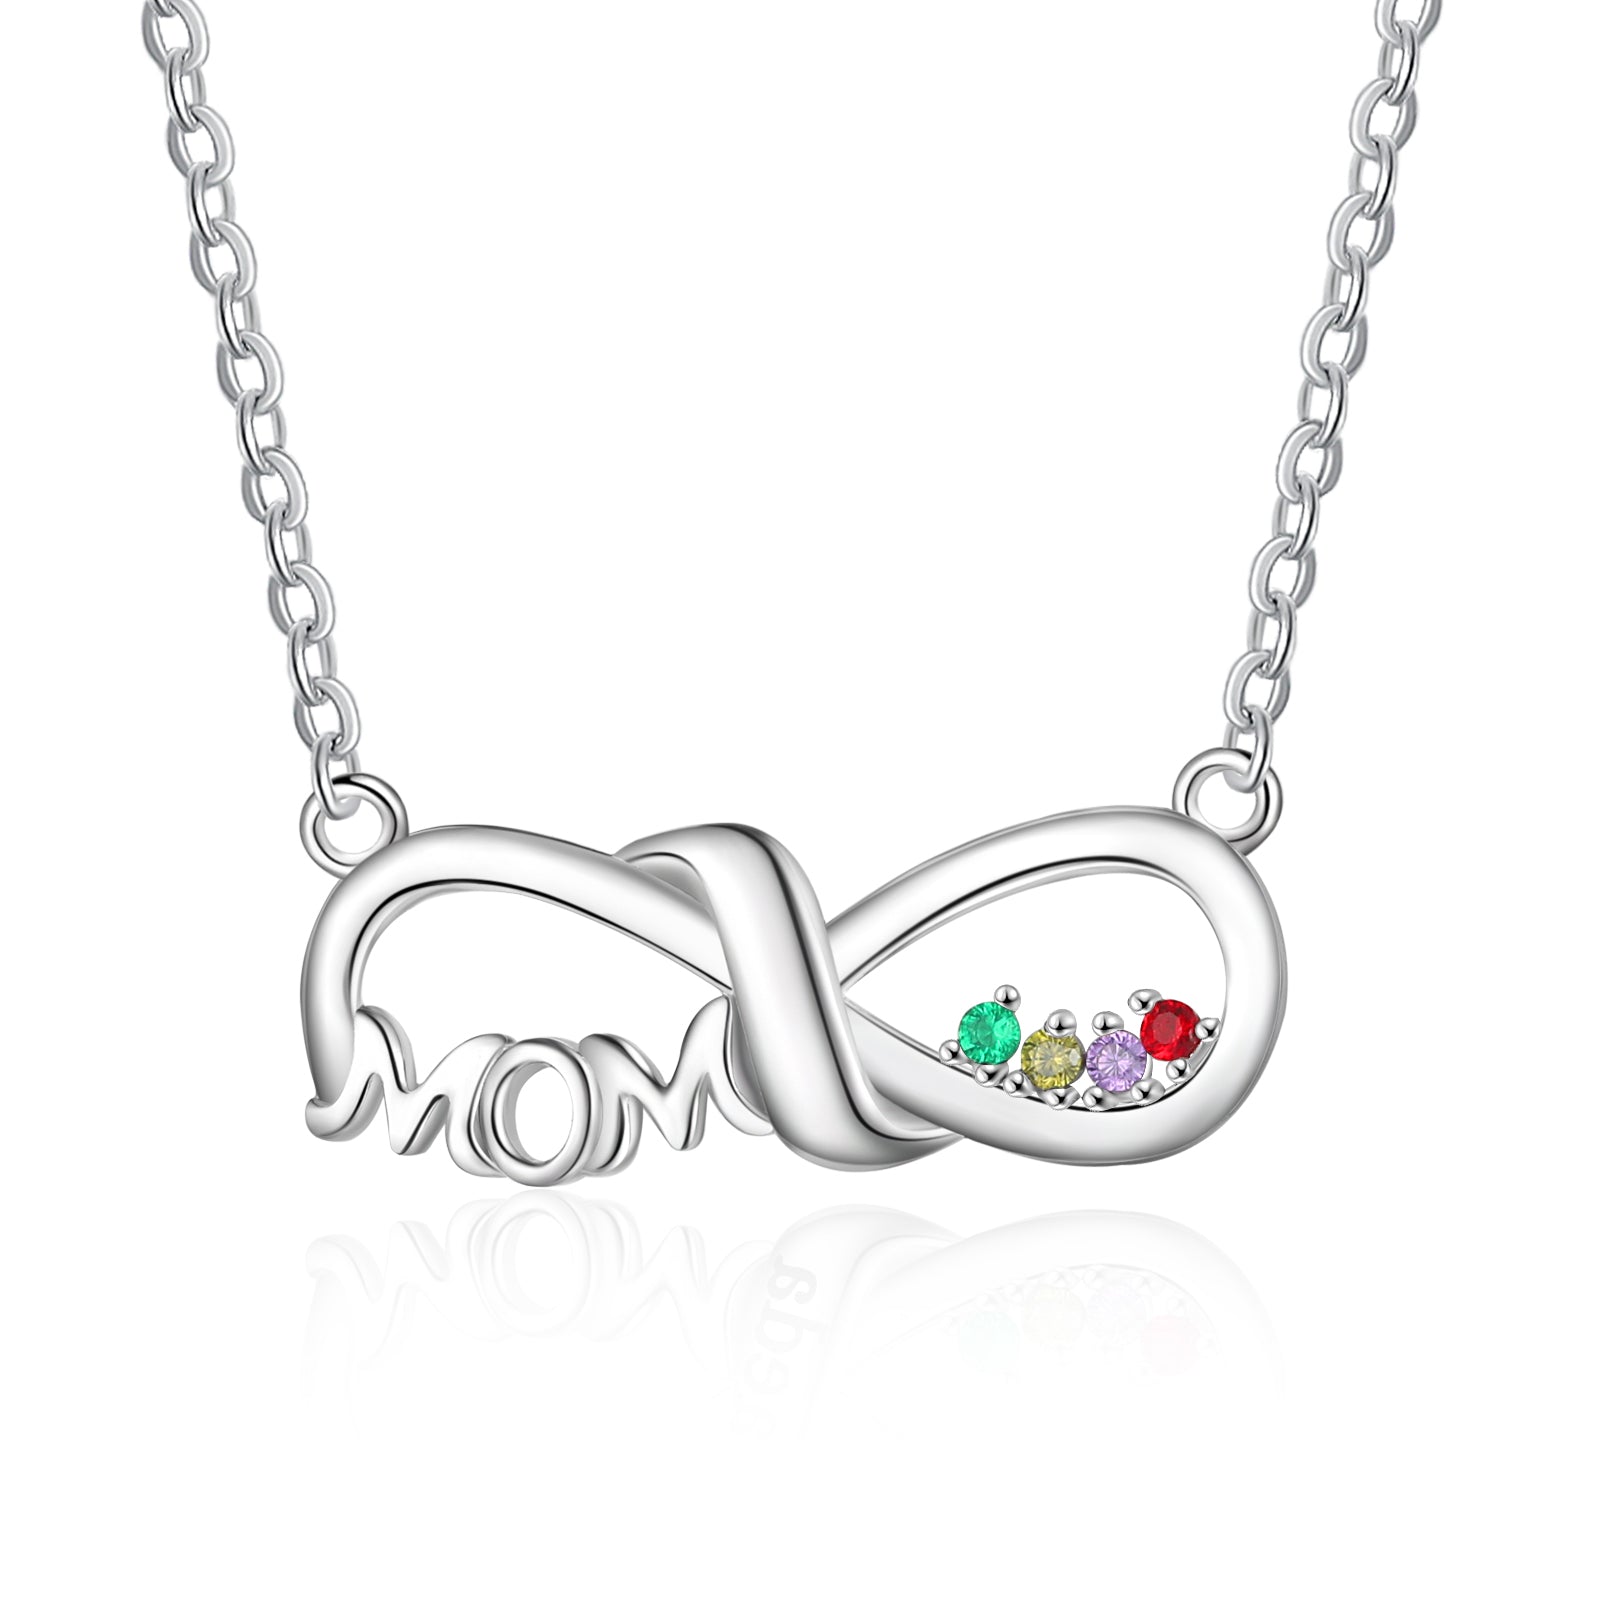 Personalized Heart Necklace for Mom